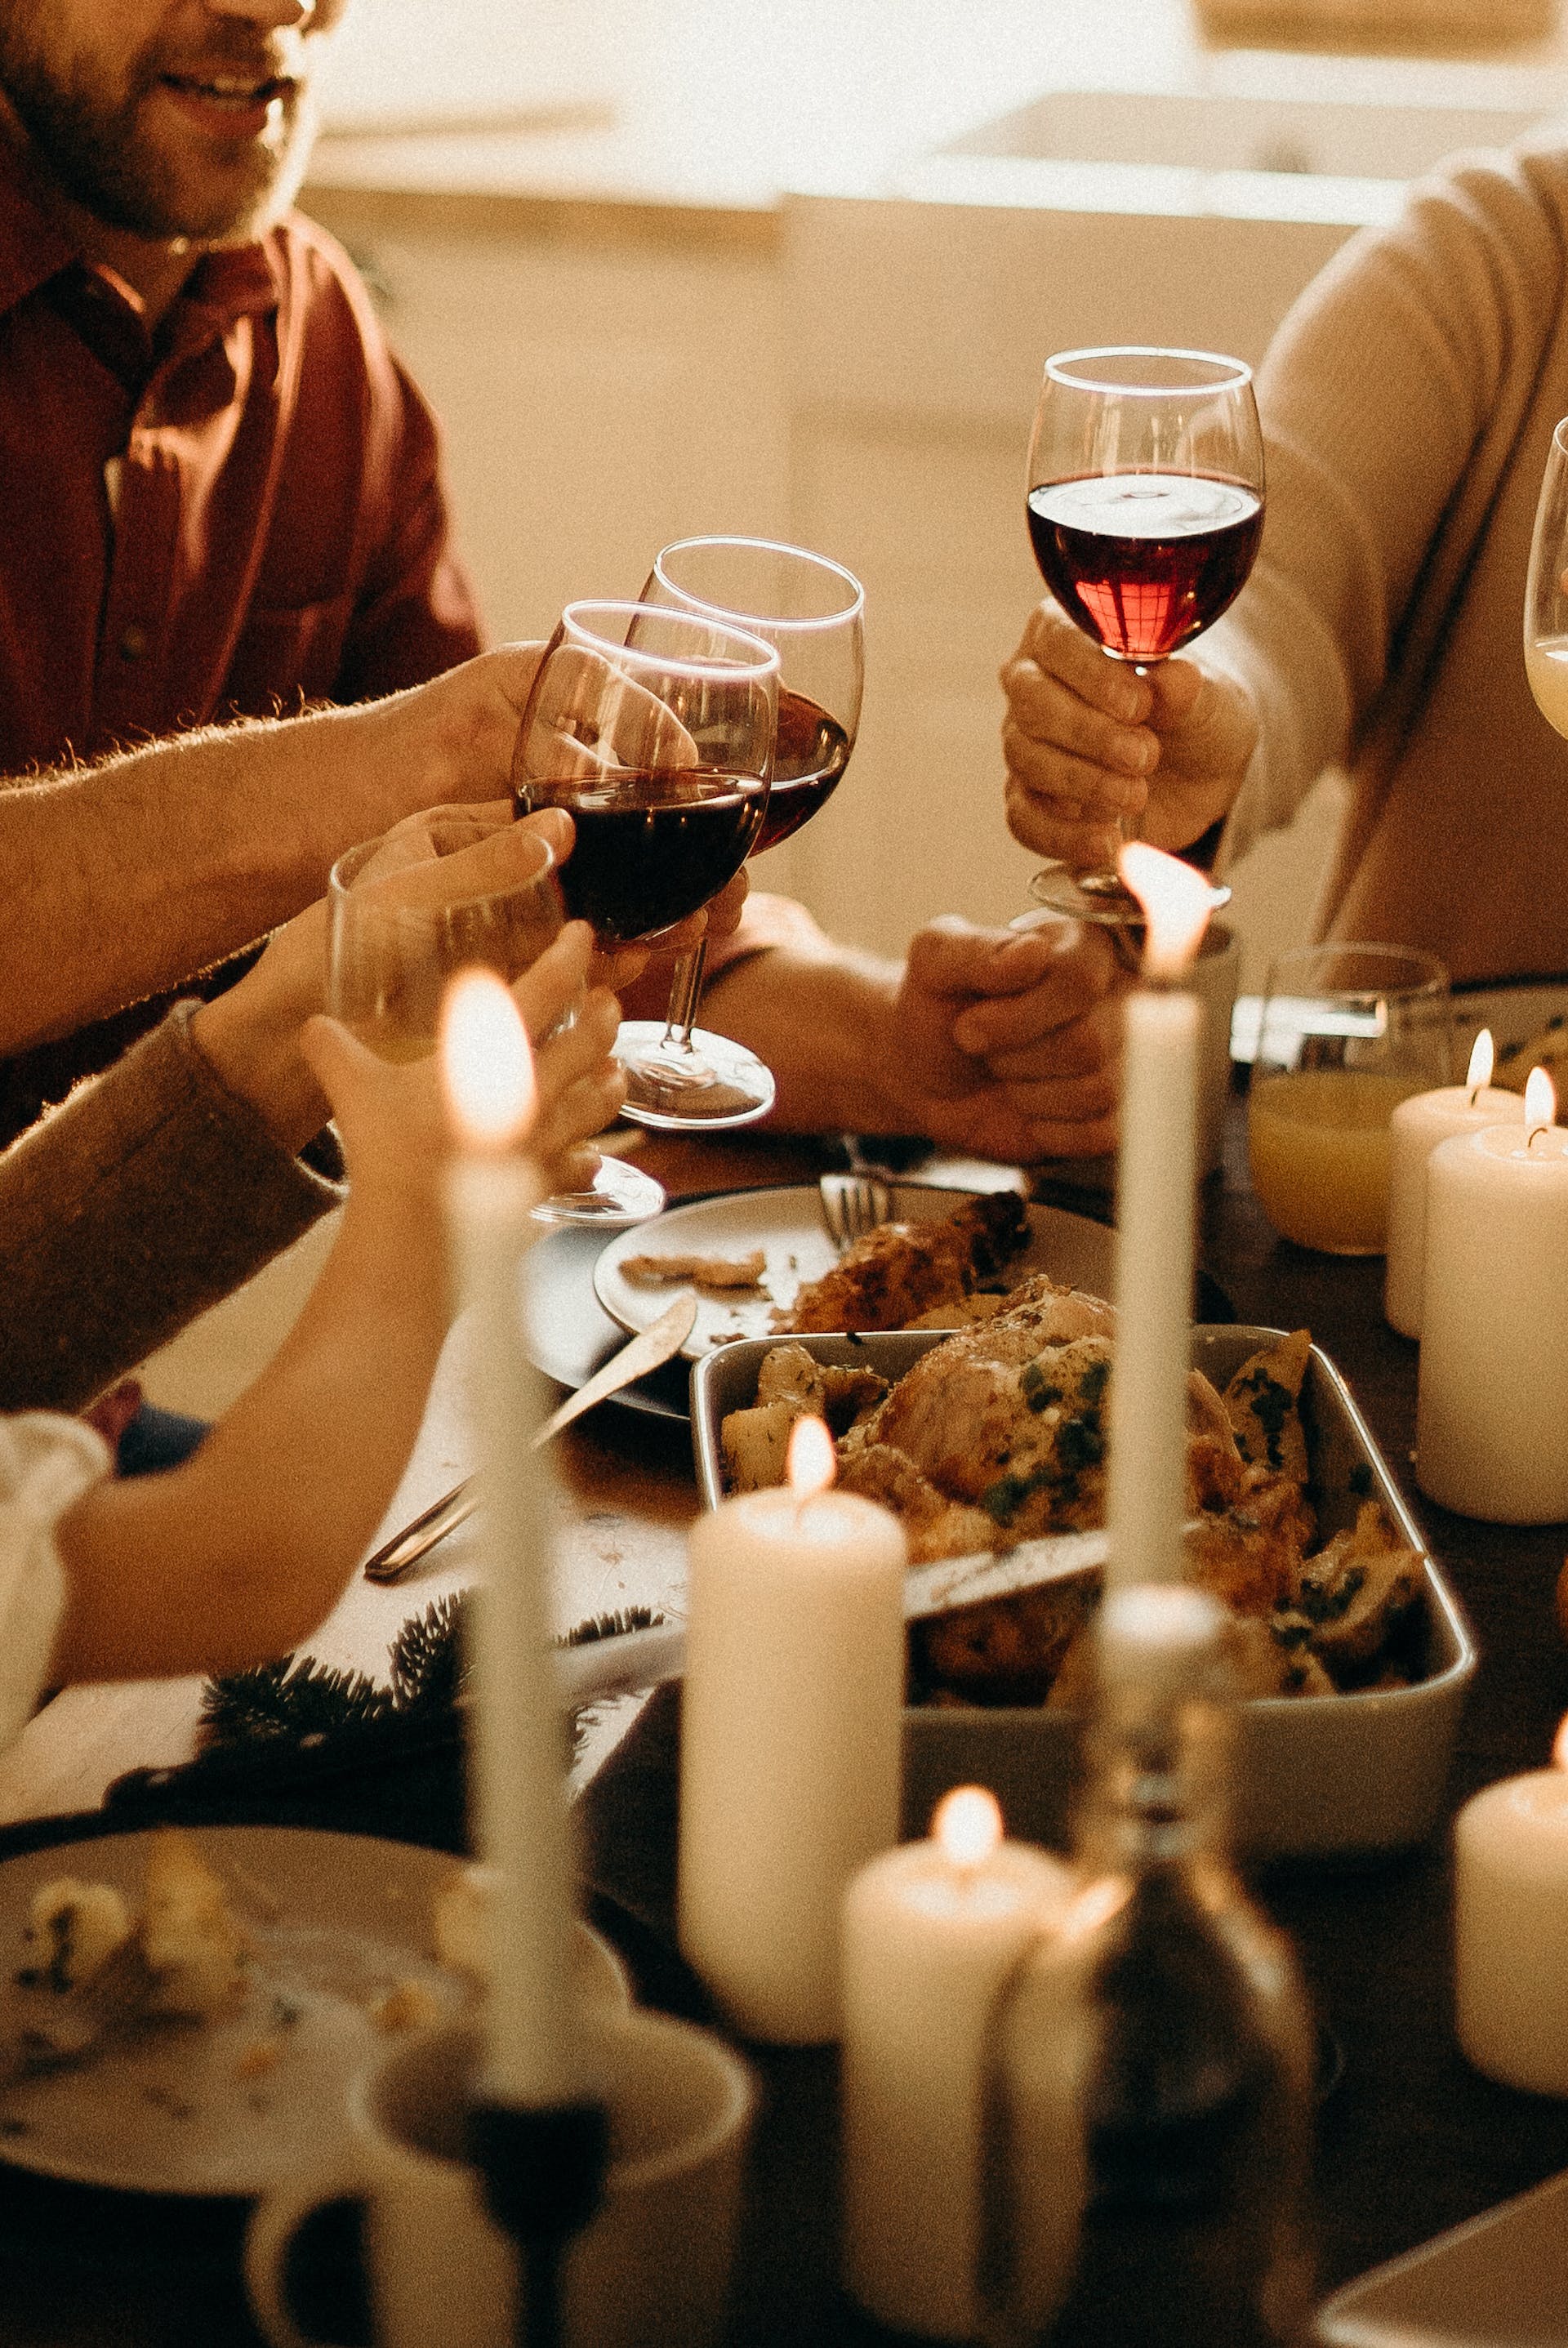 People raising wine glasses at the dinner table | Source: Pexels